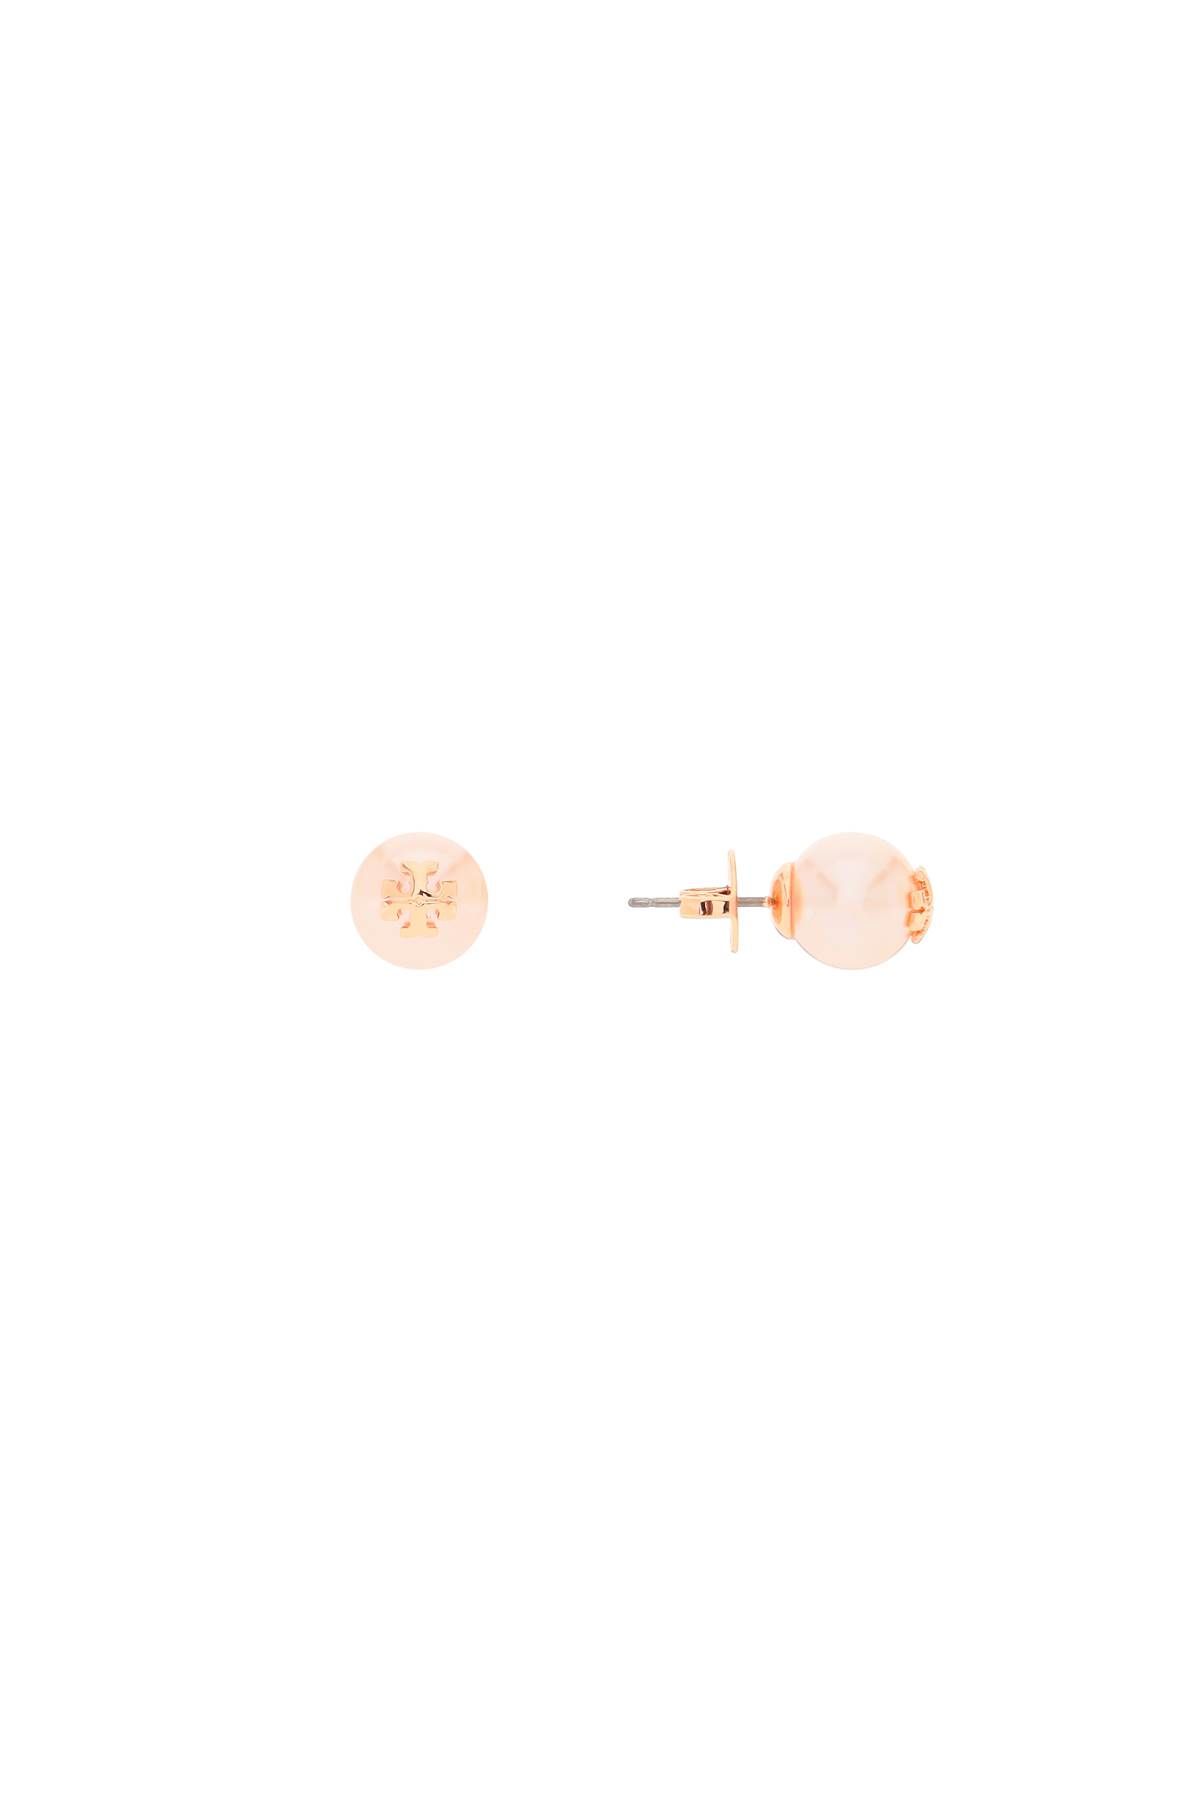 Shop Tory Burch Kira Pearl Earrings With In Pink,gold